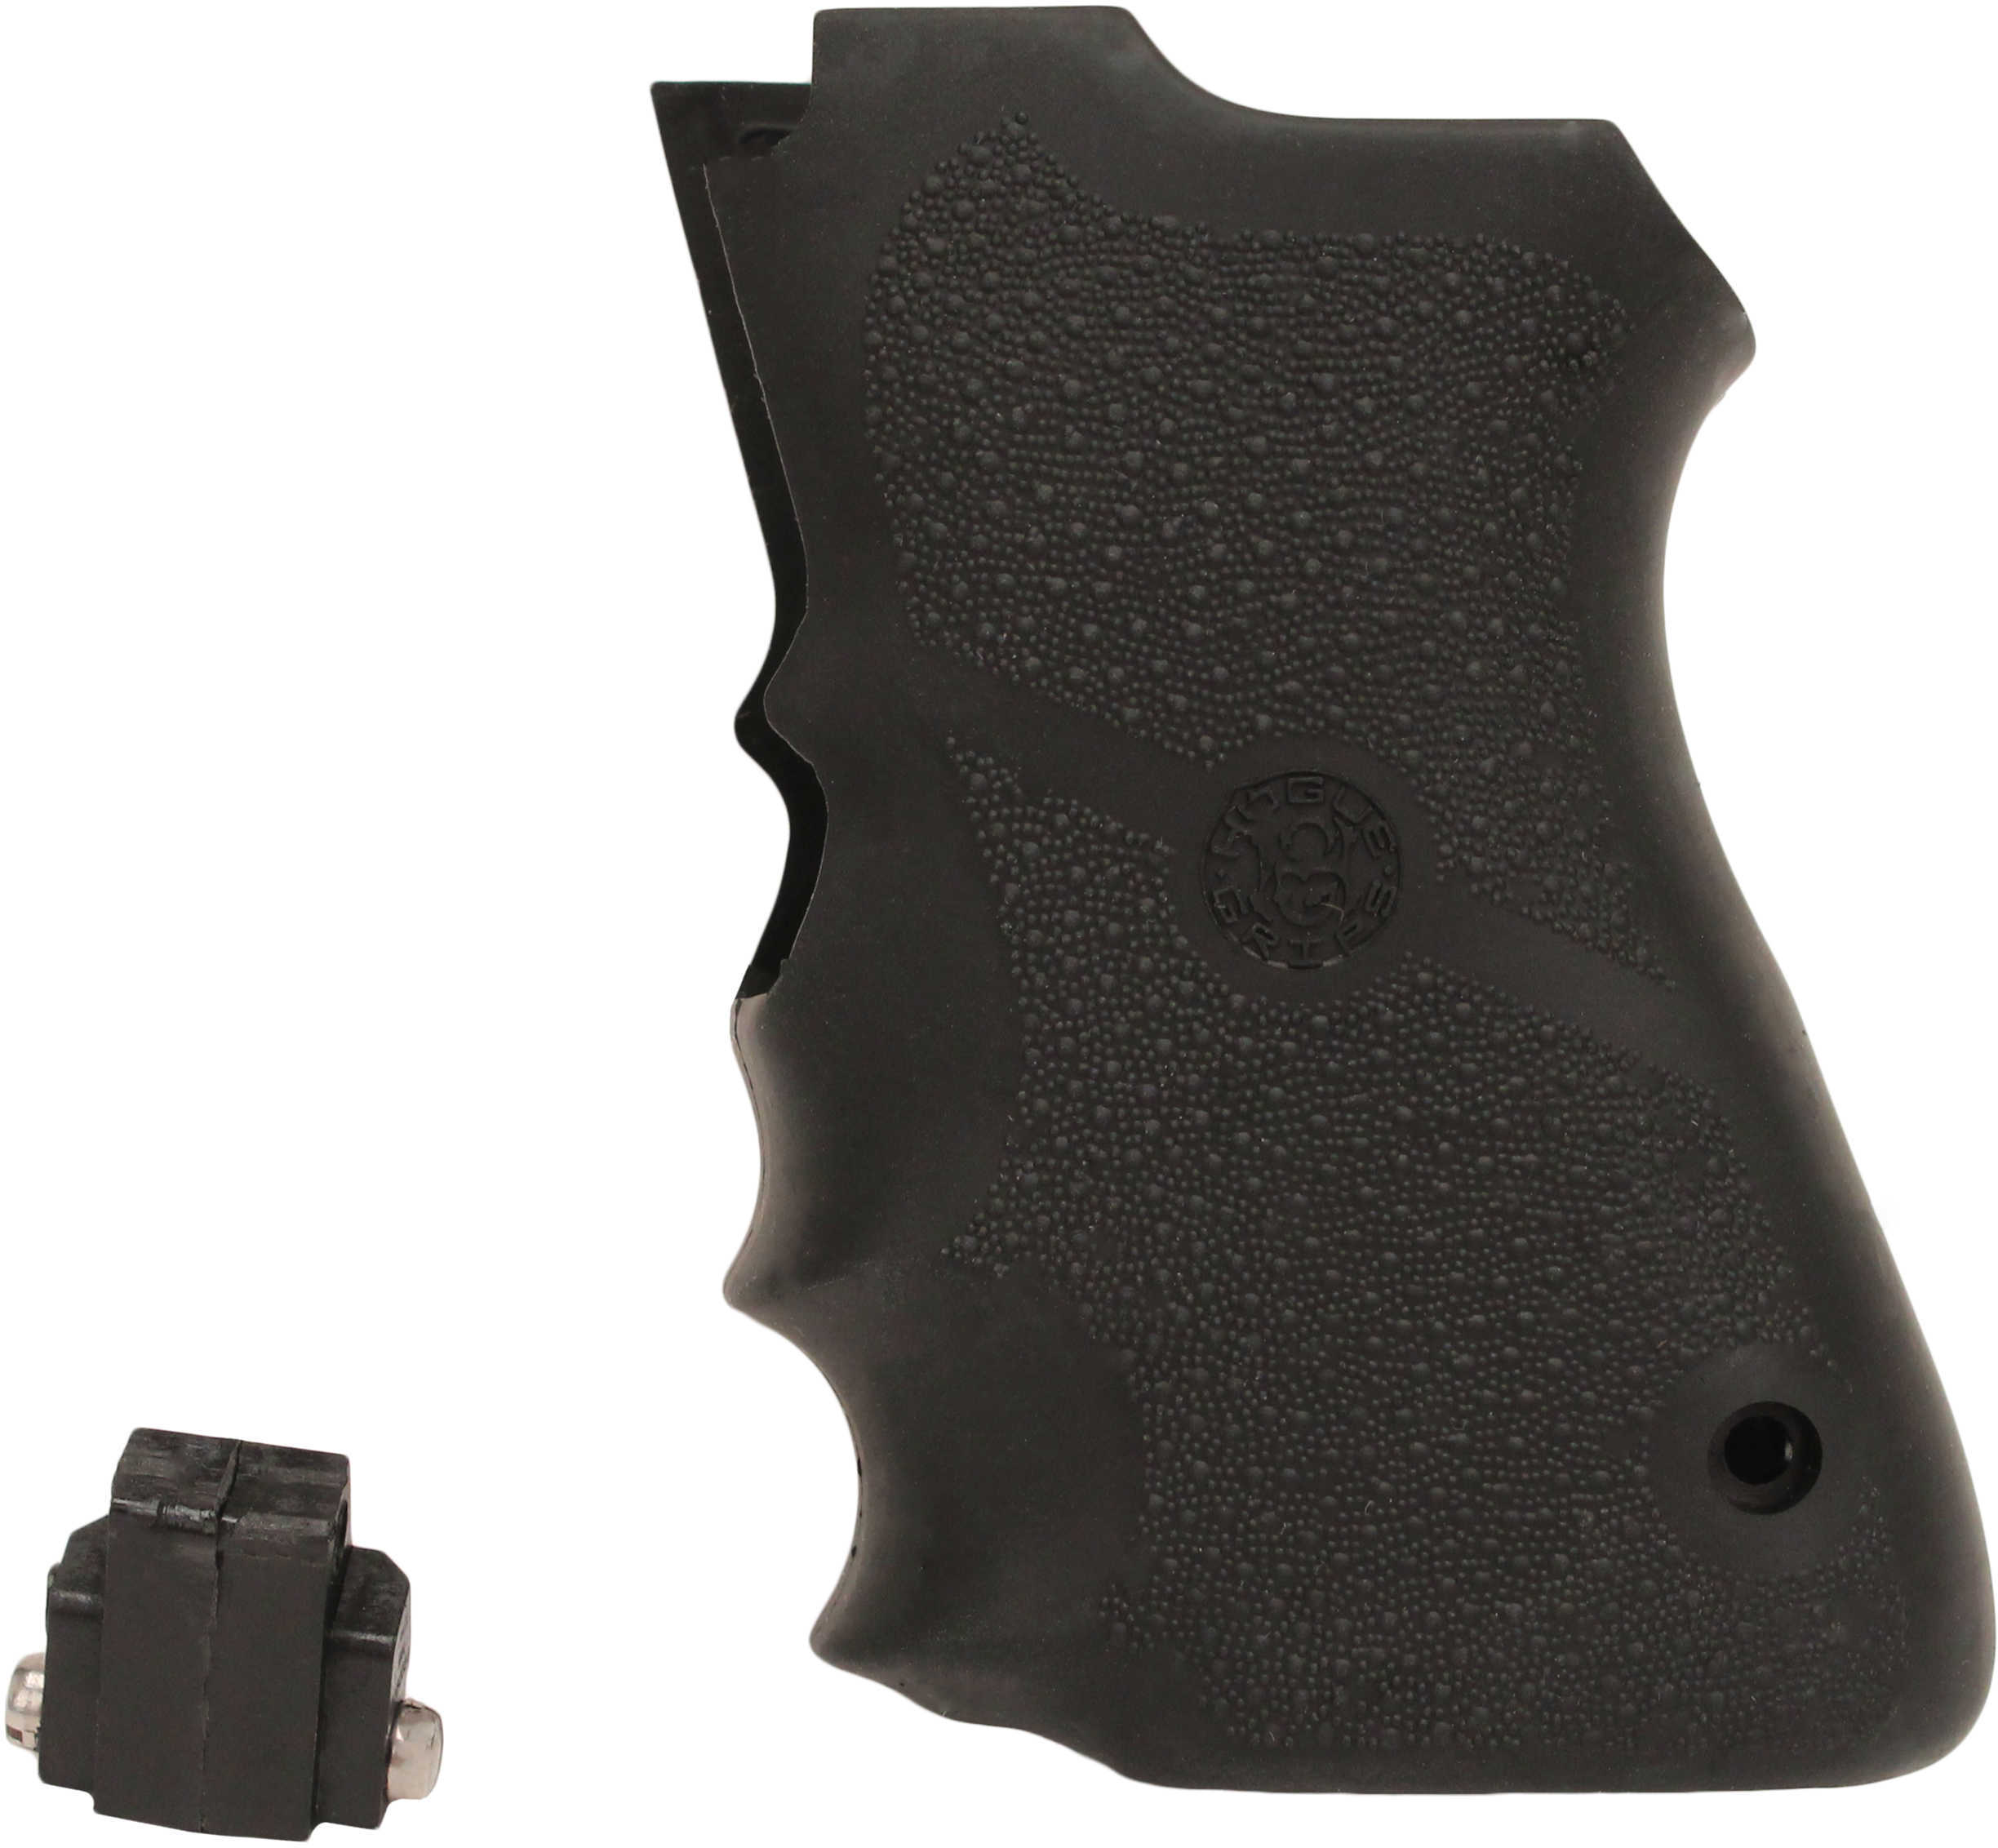 Hogue Grips Rubber Black W/Finger Grooves Double Stack Mags Wraparound S&W Compact 9mm 69000